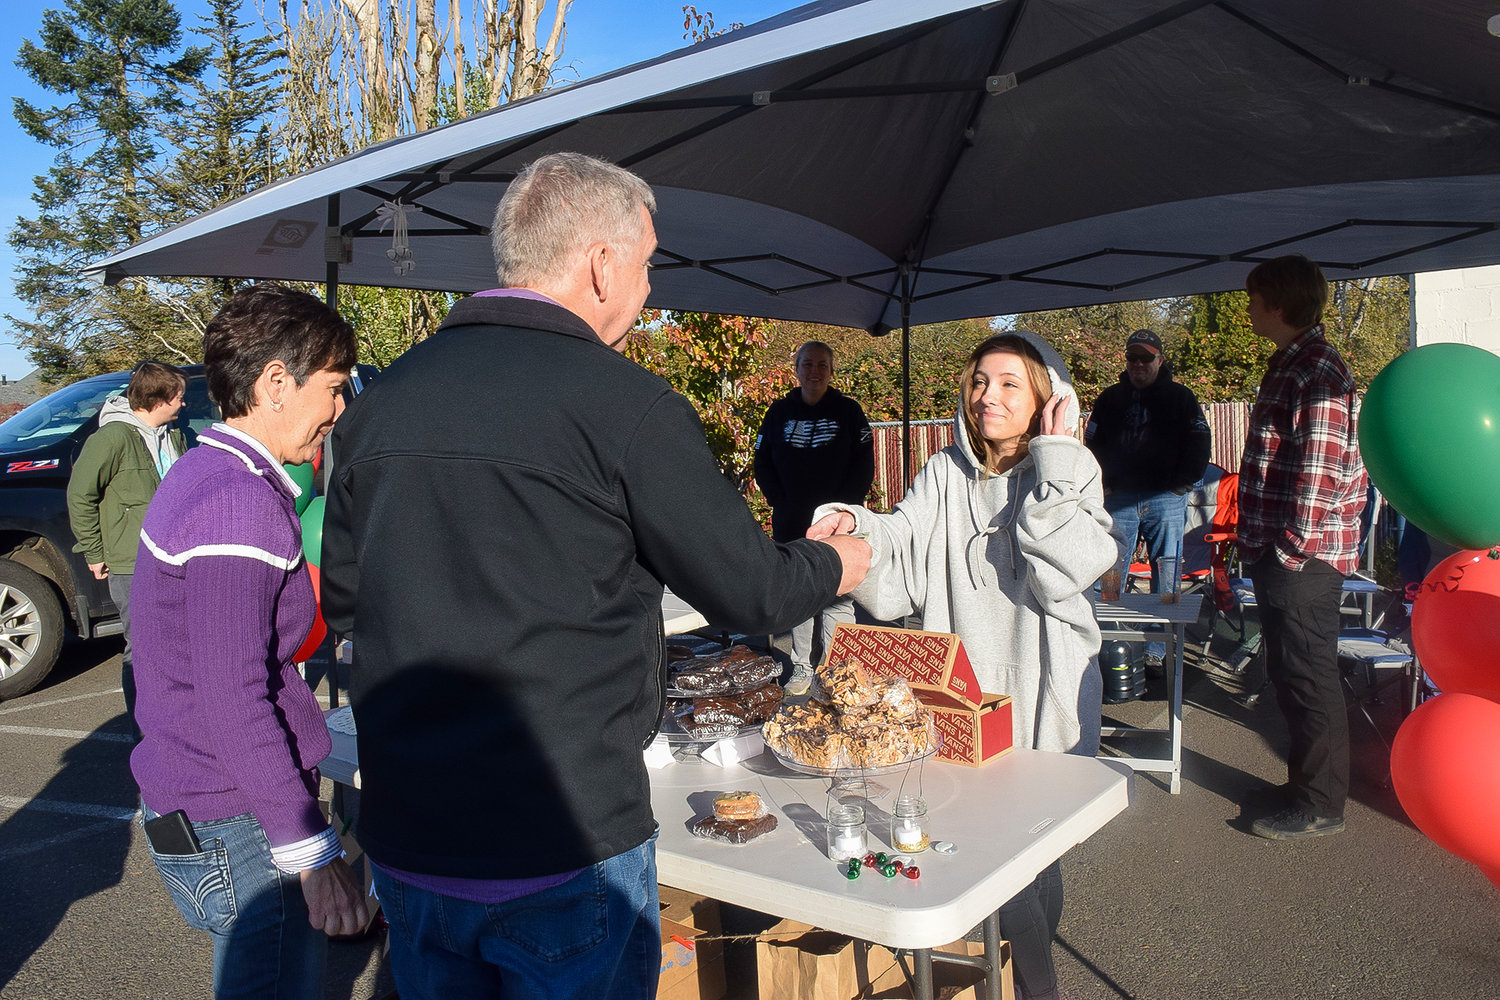 Battle Ground teen Hannah Boyett makes a sale at her fundraiser to support a family in need in the parking lot of the Margarita Factory on Nov. 20.